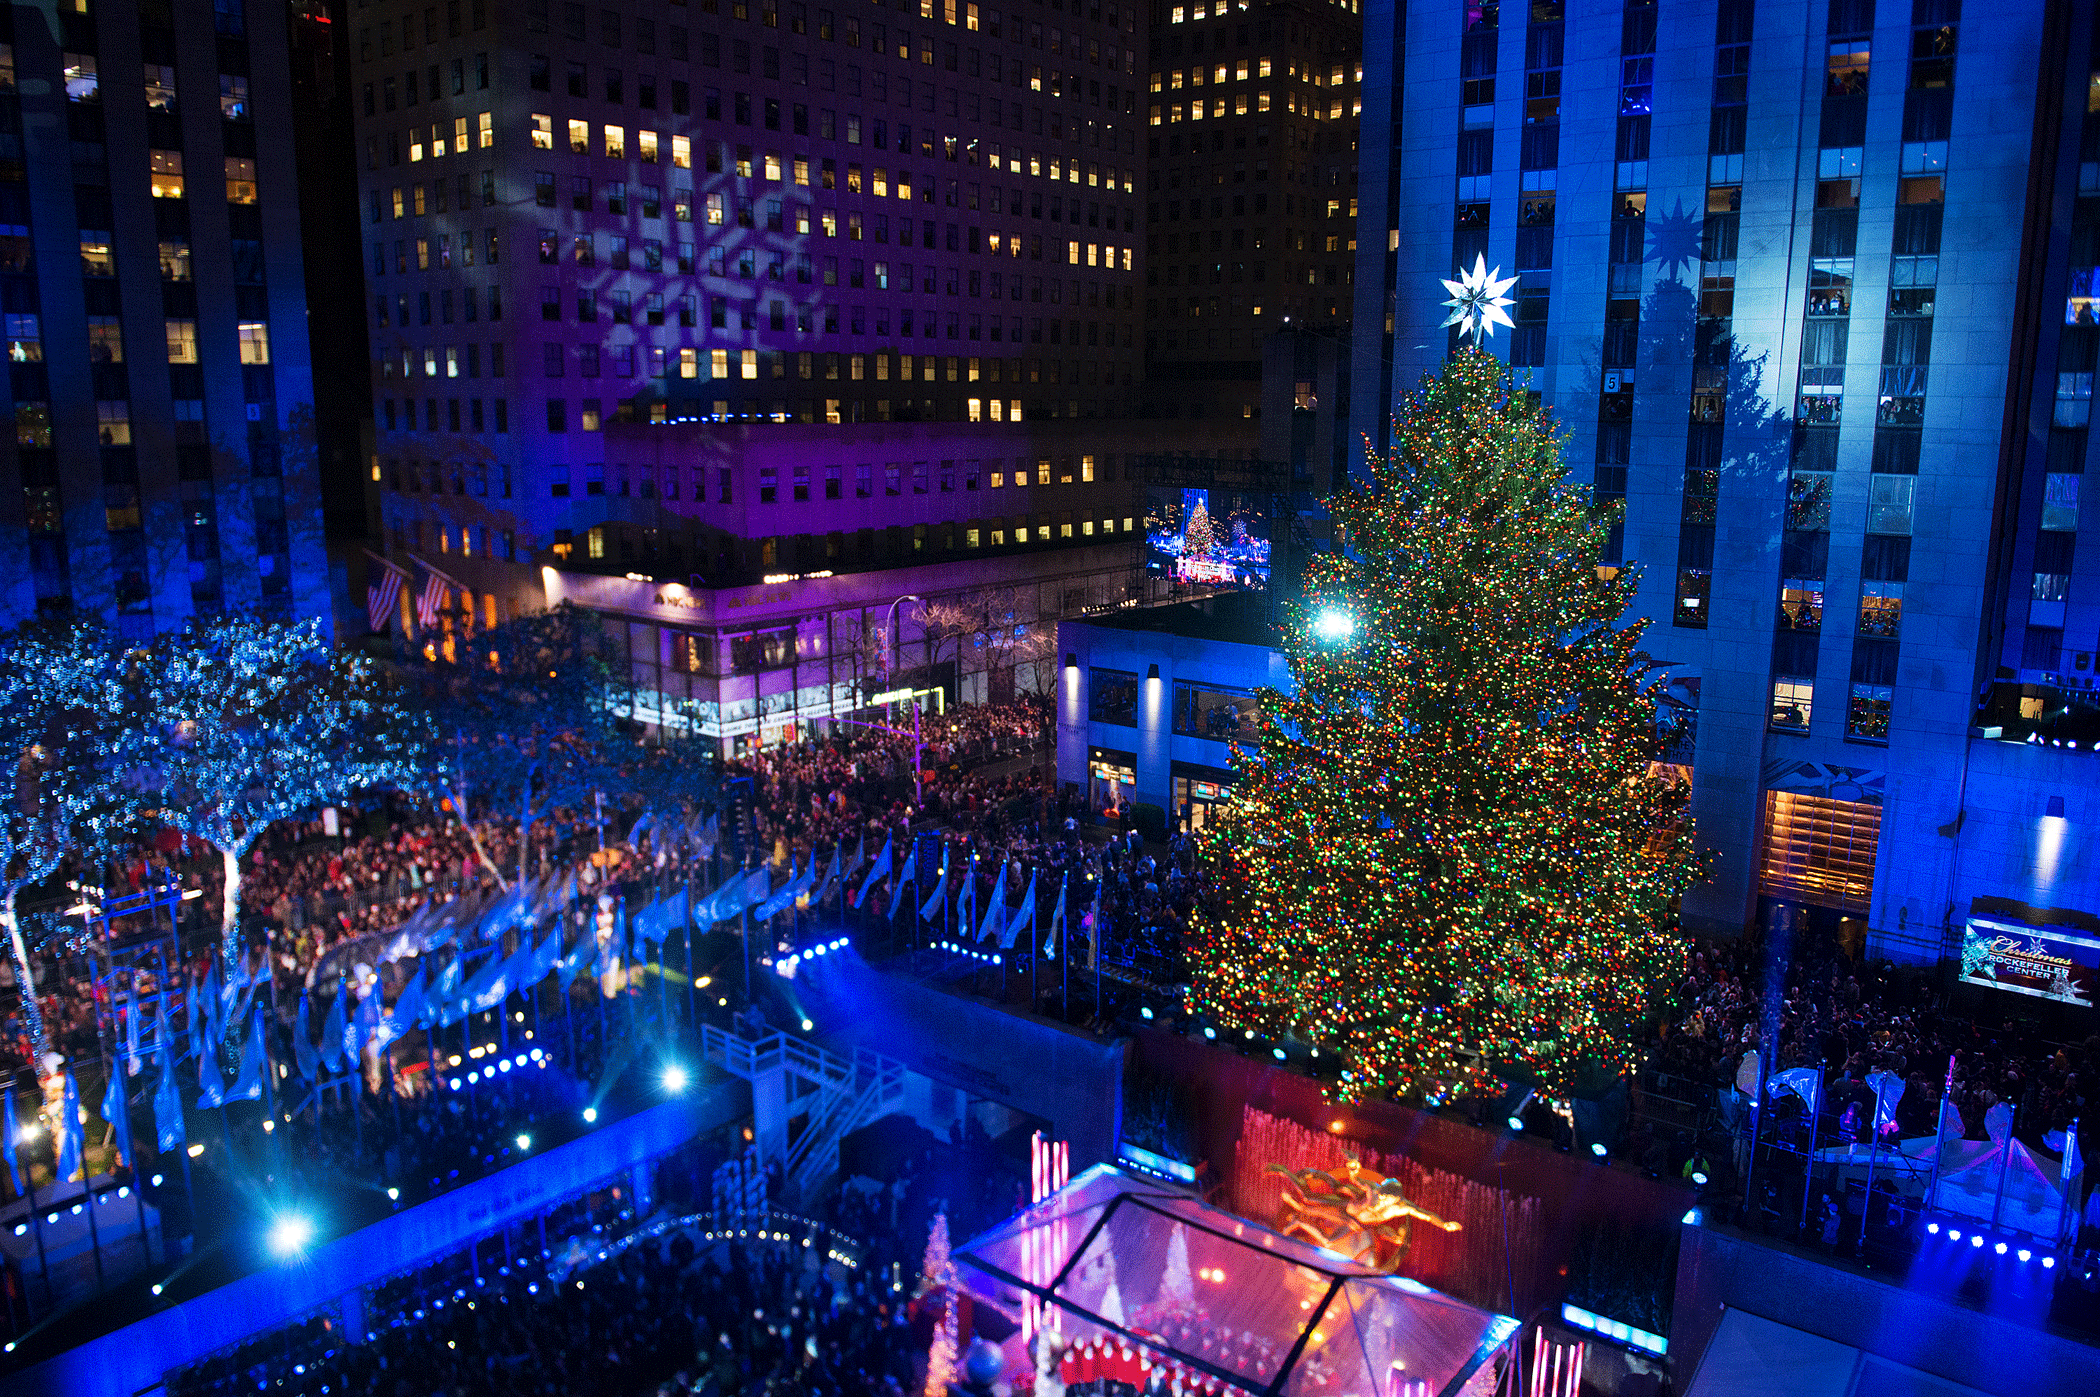 The Rockefeller Center Christmas tree lighting on Dec. 2, 2015 in New York. (Photo by Noam Galai/Getty Images)